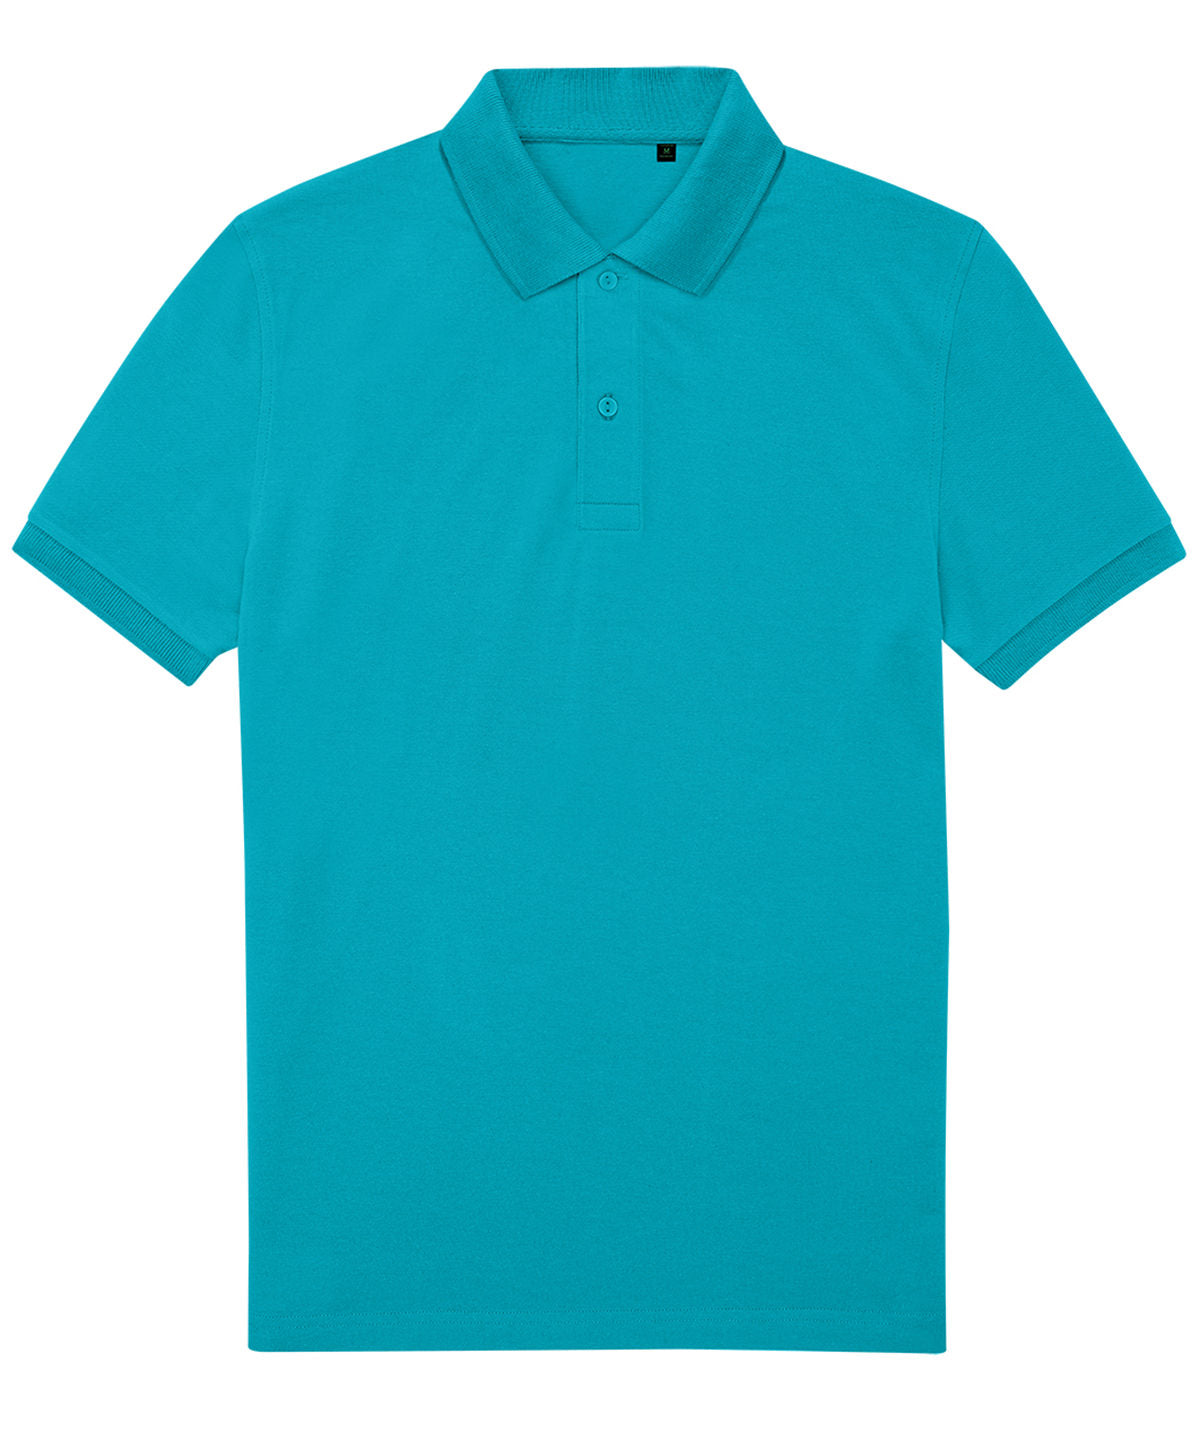 B&C Collection My Eco Polo 65/35 Pop Turquoise